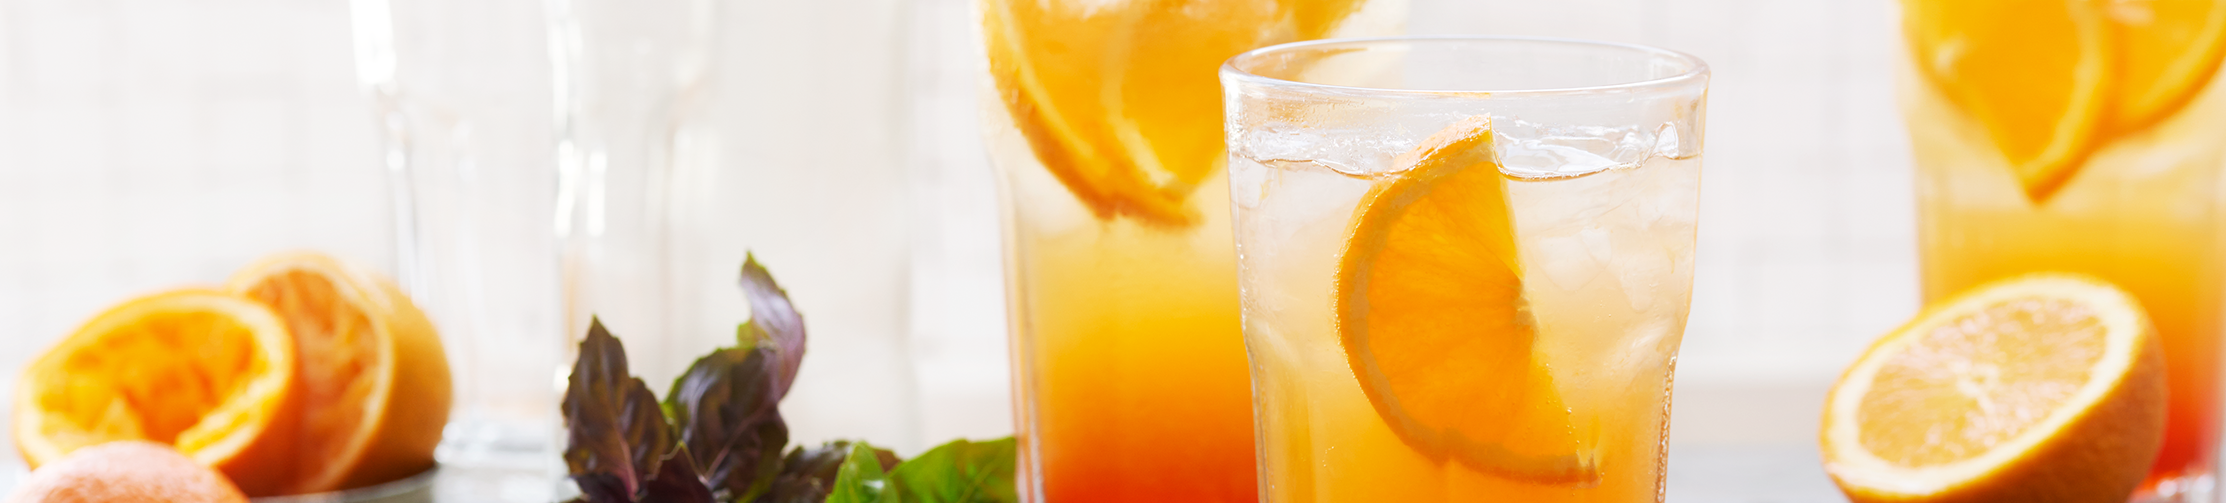 Strongbow Mixology Cider Spritz Mix Article Image 1 2226X503px